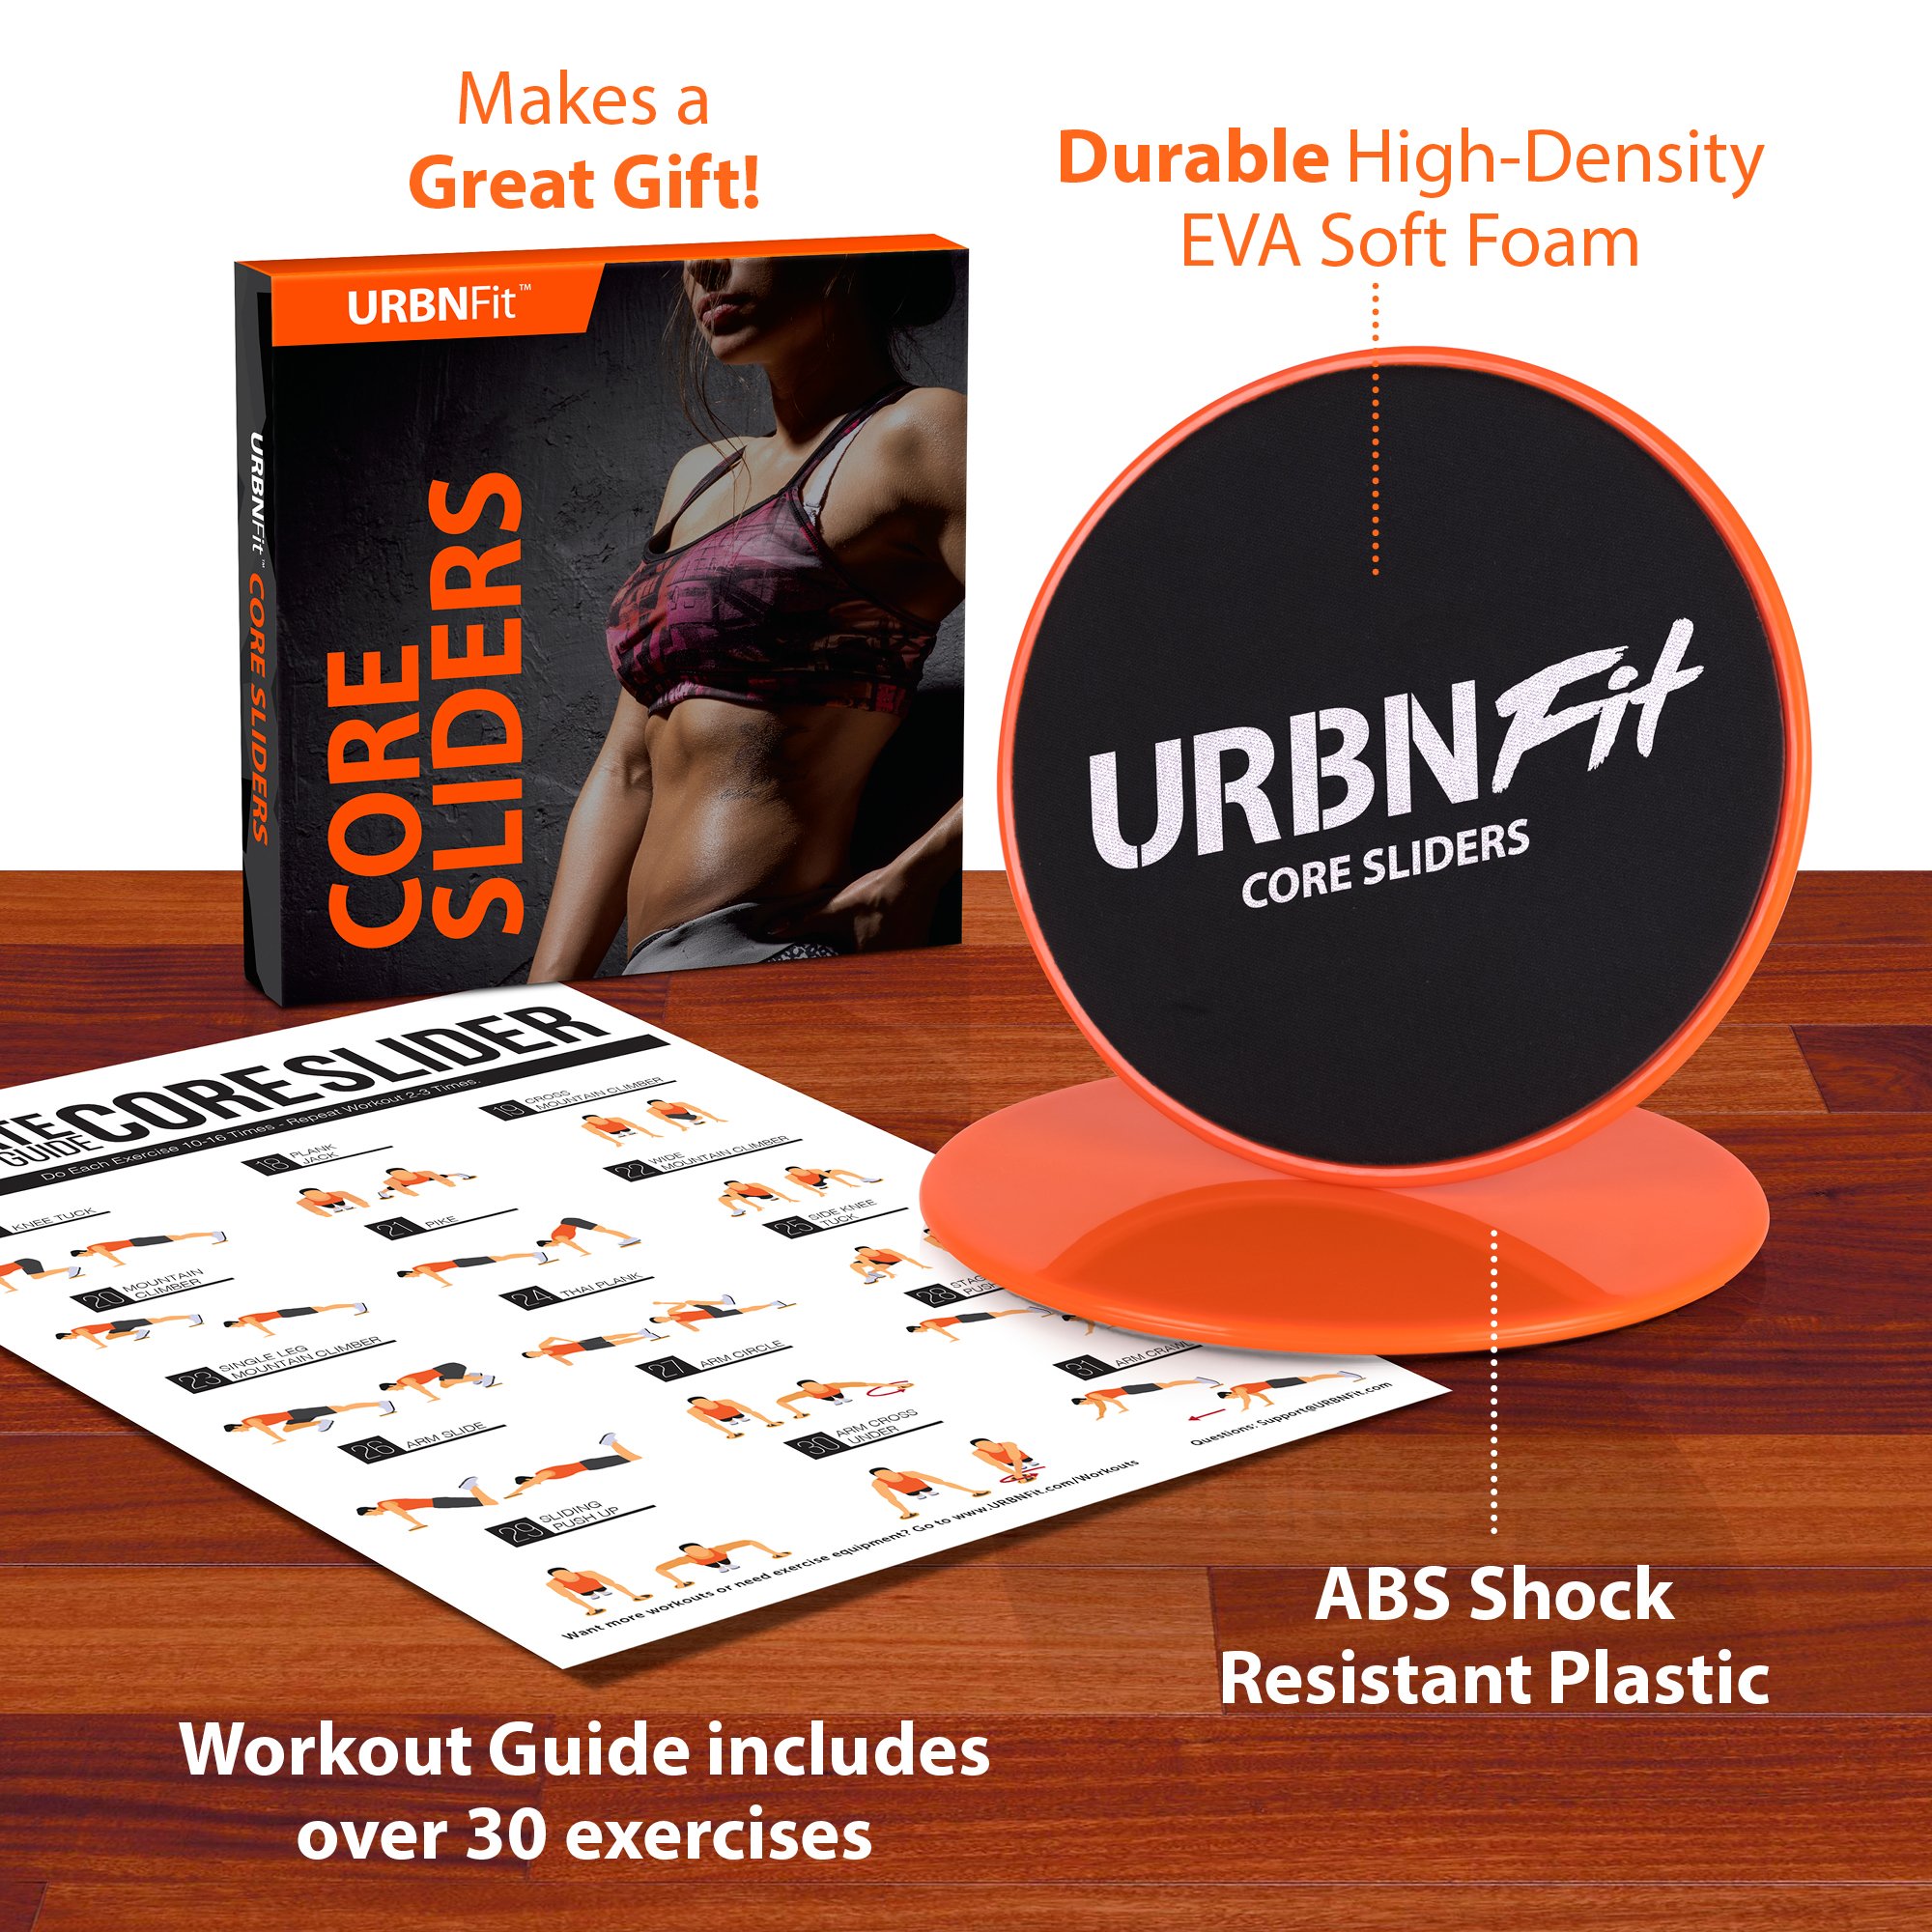 URBNFit Gliding Discs Core Sliders - Dual Sided Exercise Disc for Smooth Sliding On Carpet and Hardwood Floors - Gliders Workout Legs, Arms Back, Abs at Home or Gym or Travel - Fitness Equipment